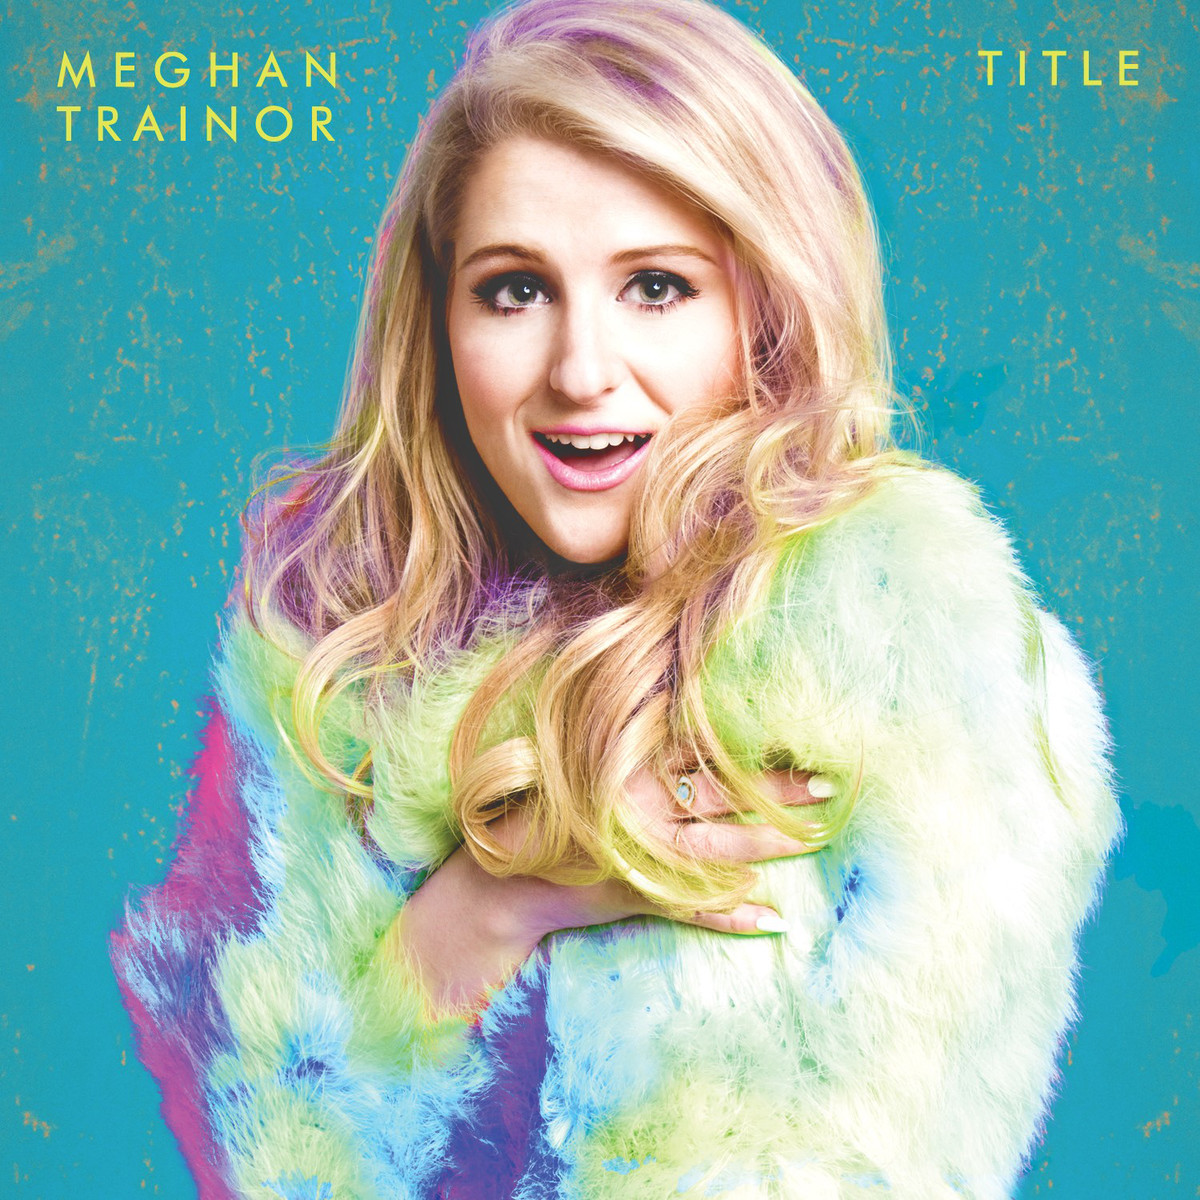 Inside by the Music: Inside the Album: Title / Meghan Trainor